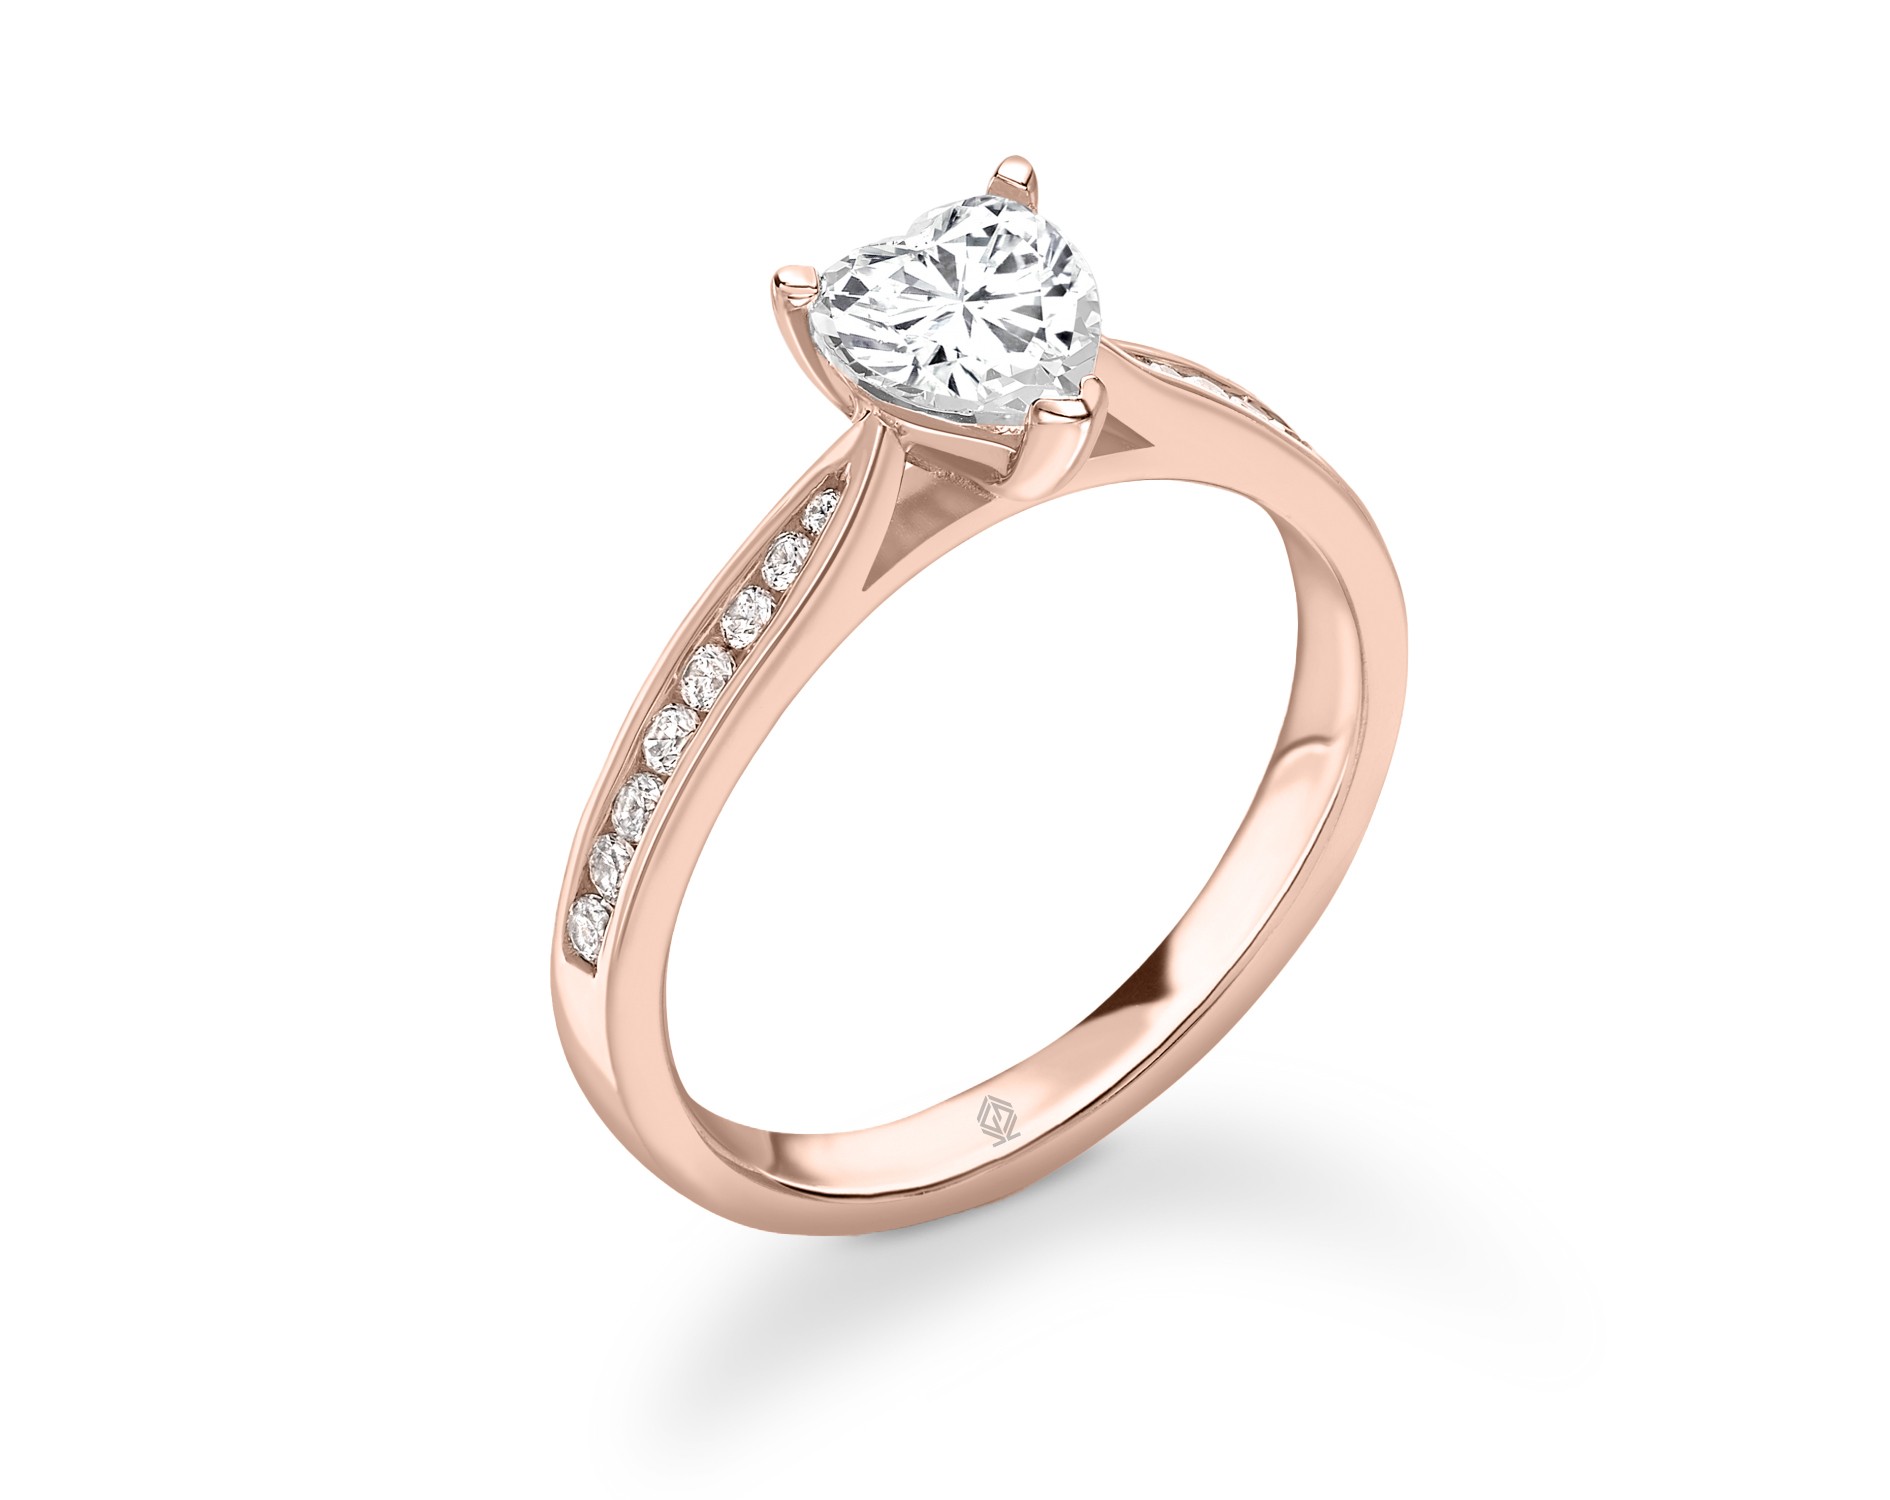 18K ROSE GOLD HEART CUT DIAMOND ENGAGEMENT RING WITH SIDE STONES CHANNEL SET